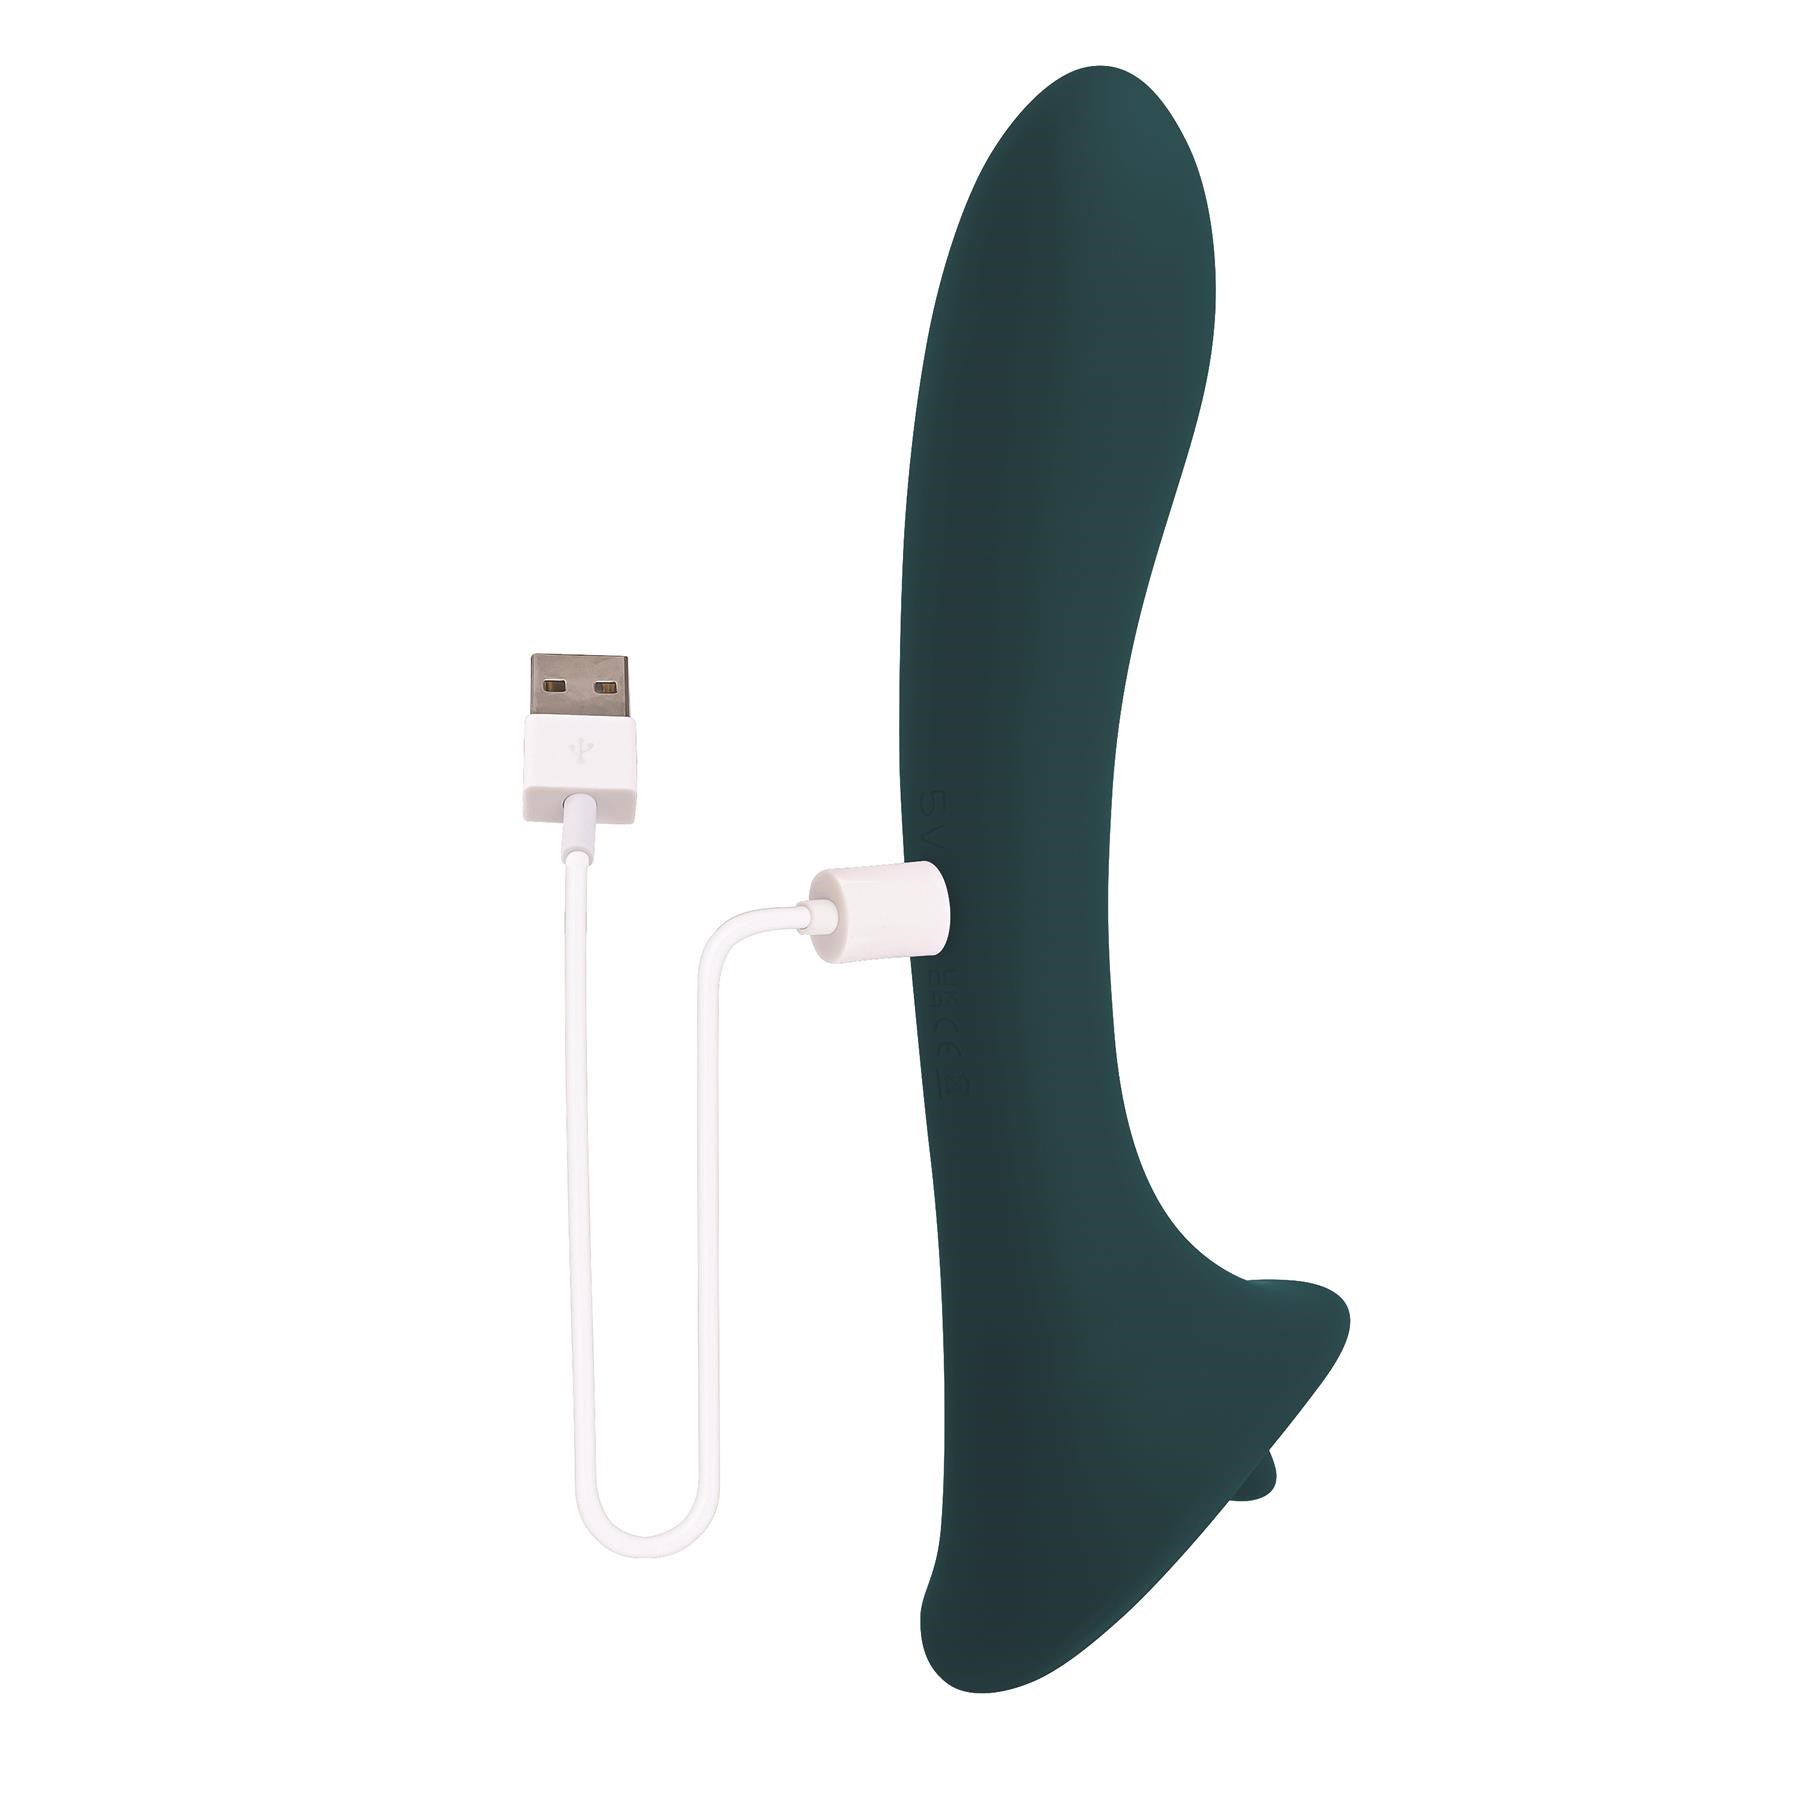 Playboy Pleasure True Indulgence Clitoral Massager - Showing Where Charging Cable is Placed